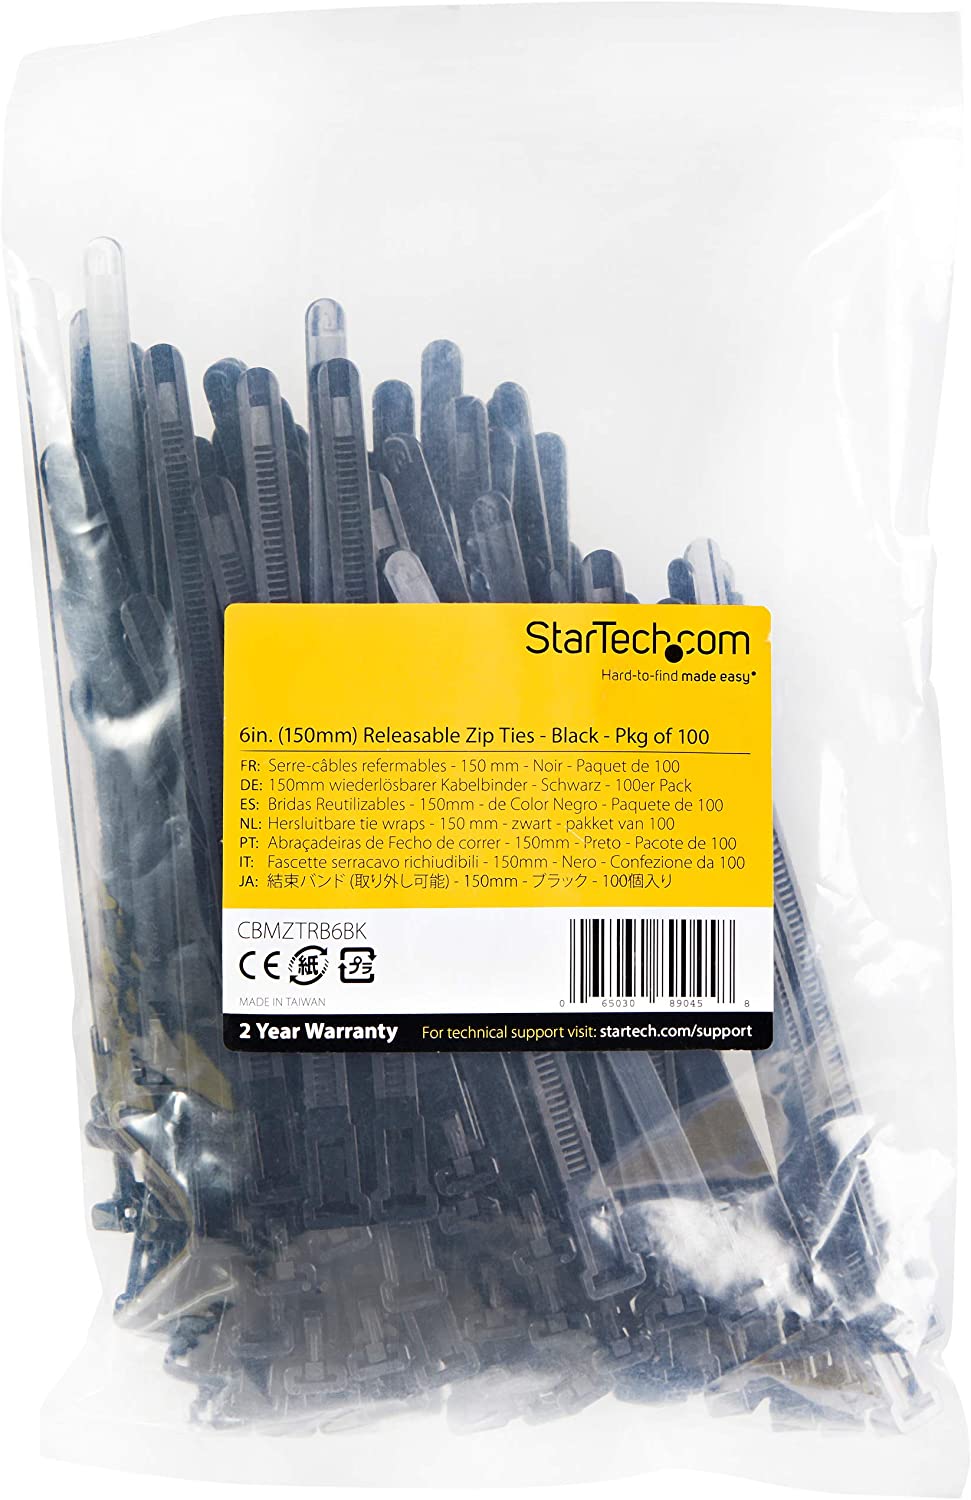 StarTech.com 6"(15cm) Reusable Cable Ties - 1/4"(7mm) Wide, 1-3/8"(35mm) Bundle Dia. 50lb(22kg) Tensile Strength, Releasable Nylon Ties, Indoor/Outdoor, 94V-2/UL Listed, 100 Pack - Black (CBMZTRB6BK) Black 6 in | 50 lbs (22kg) Reusable 100